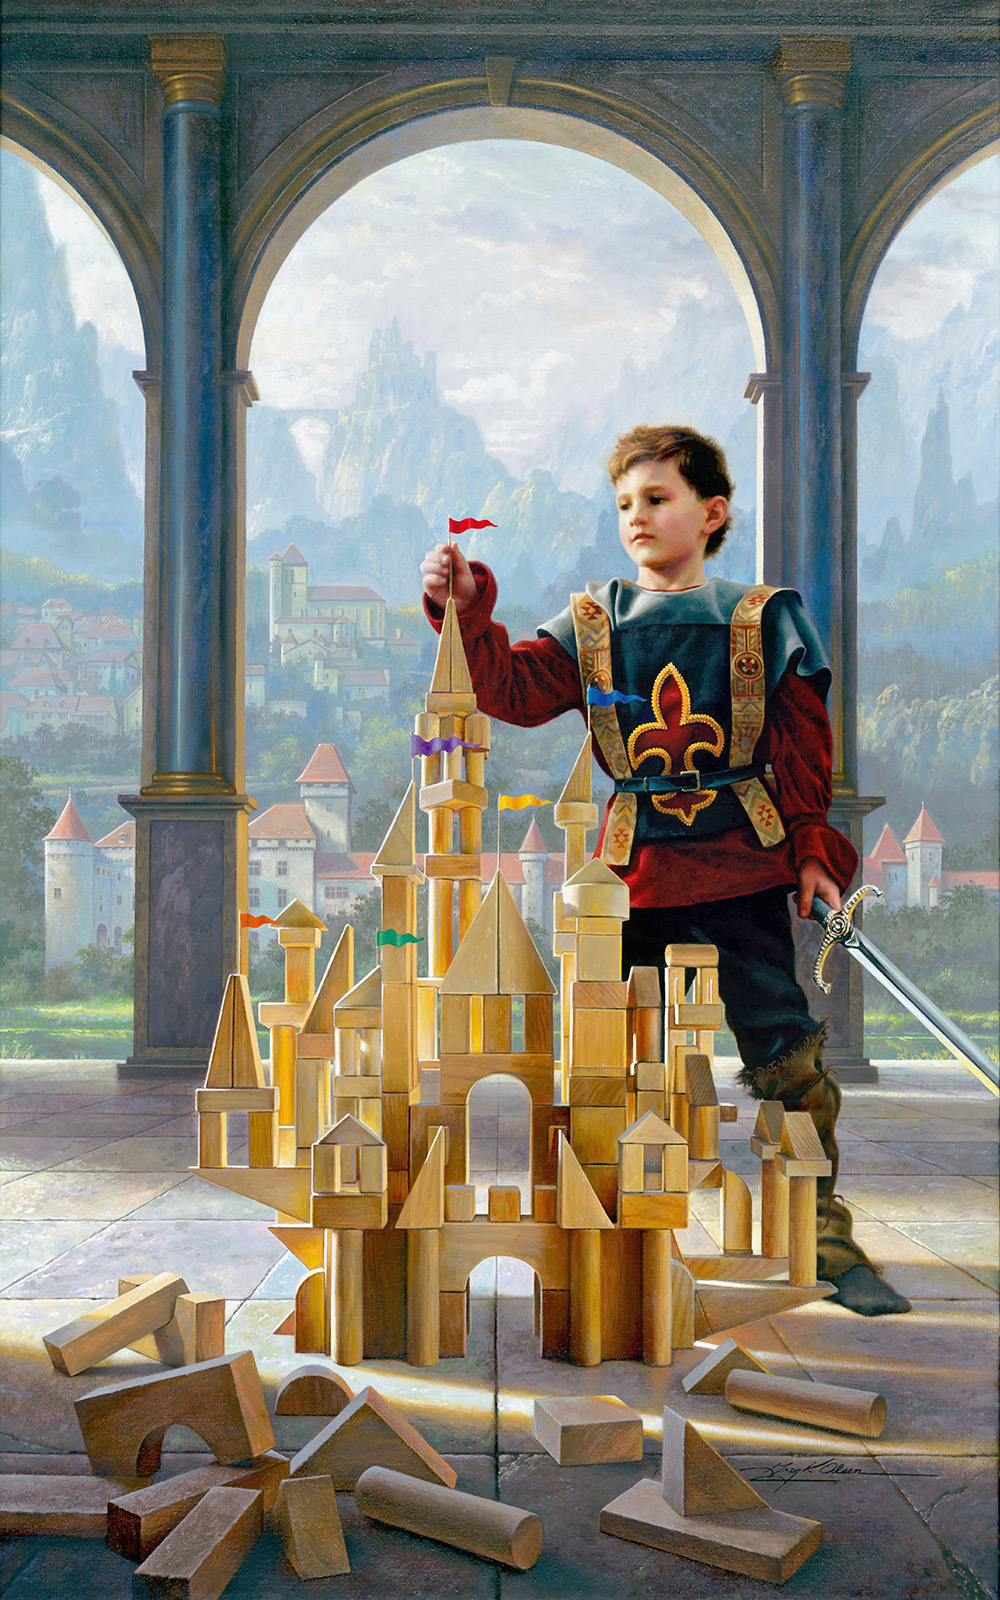 Heir To The Kingdom by Greg Olsen